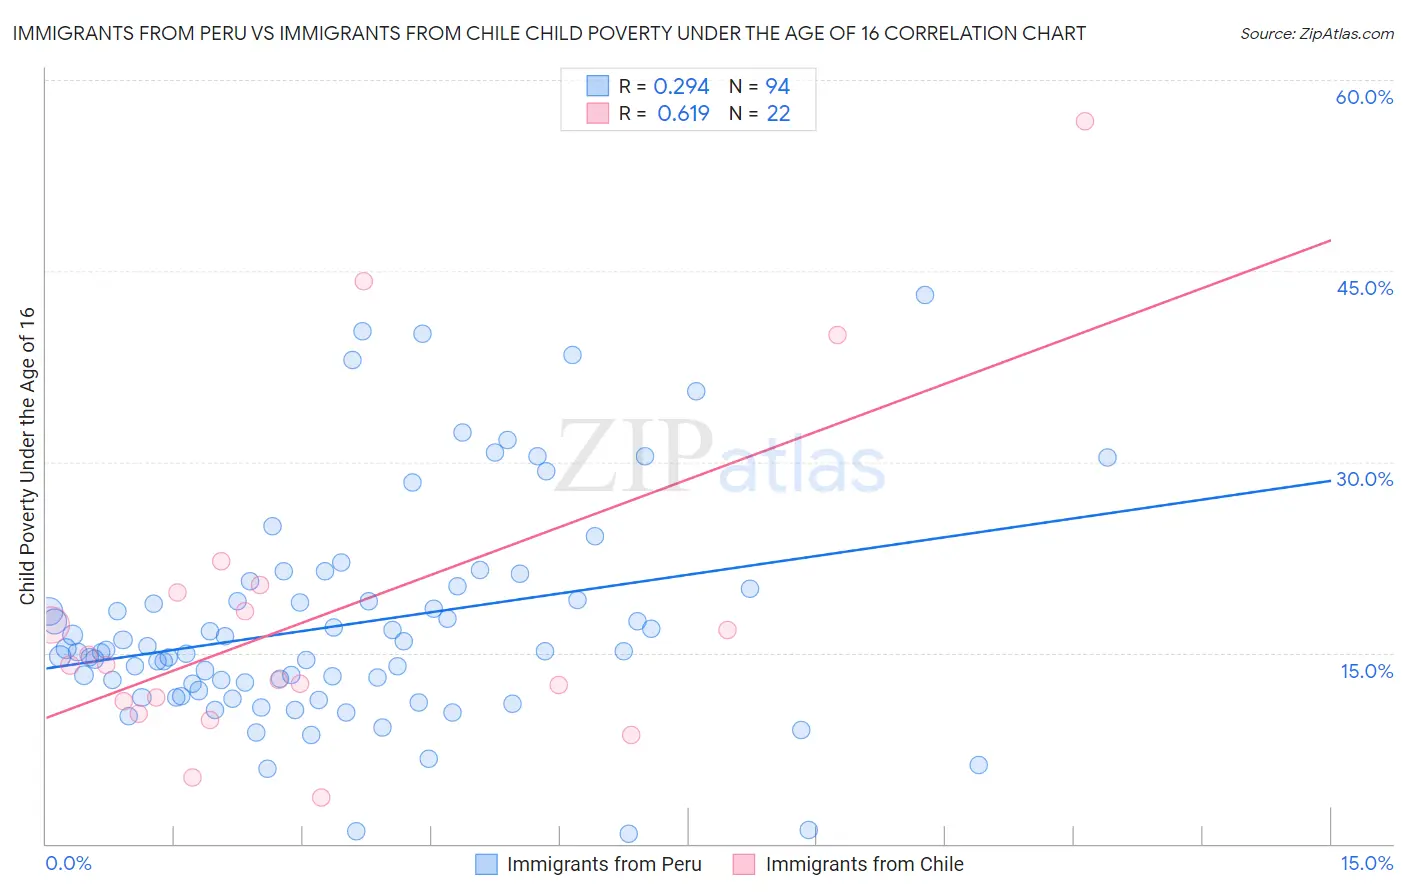 Immigrants from Peru vs Immigrants from Chile Child Poverty Under the Age of 16